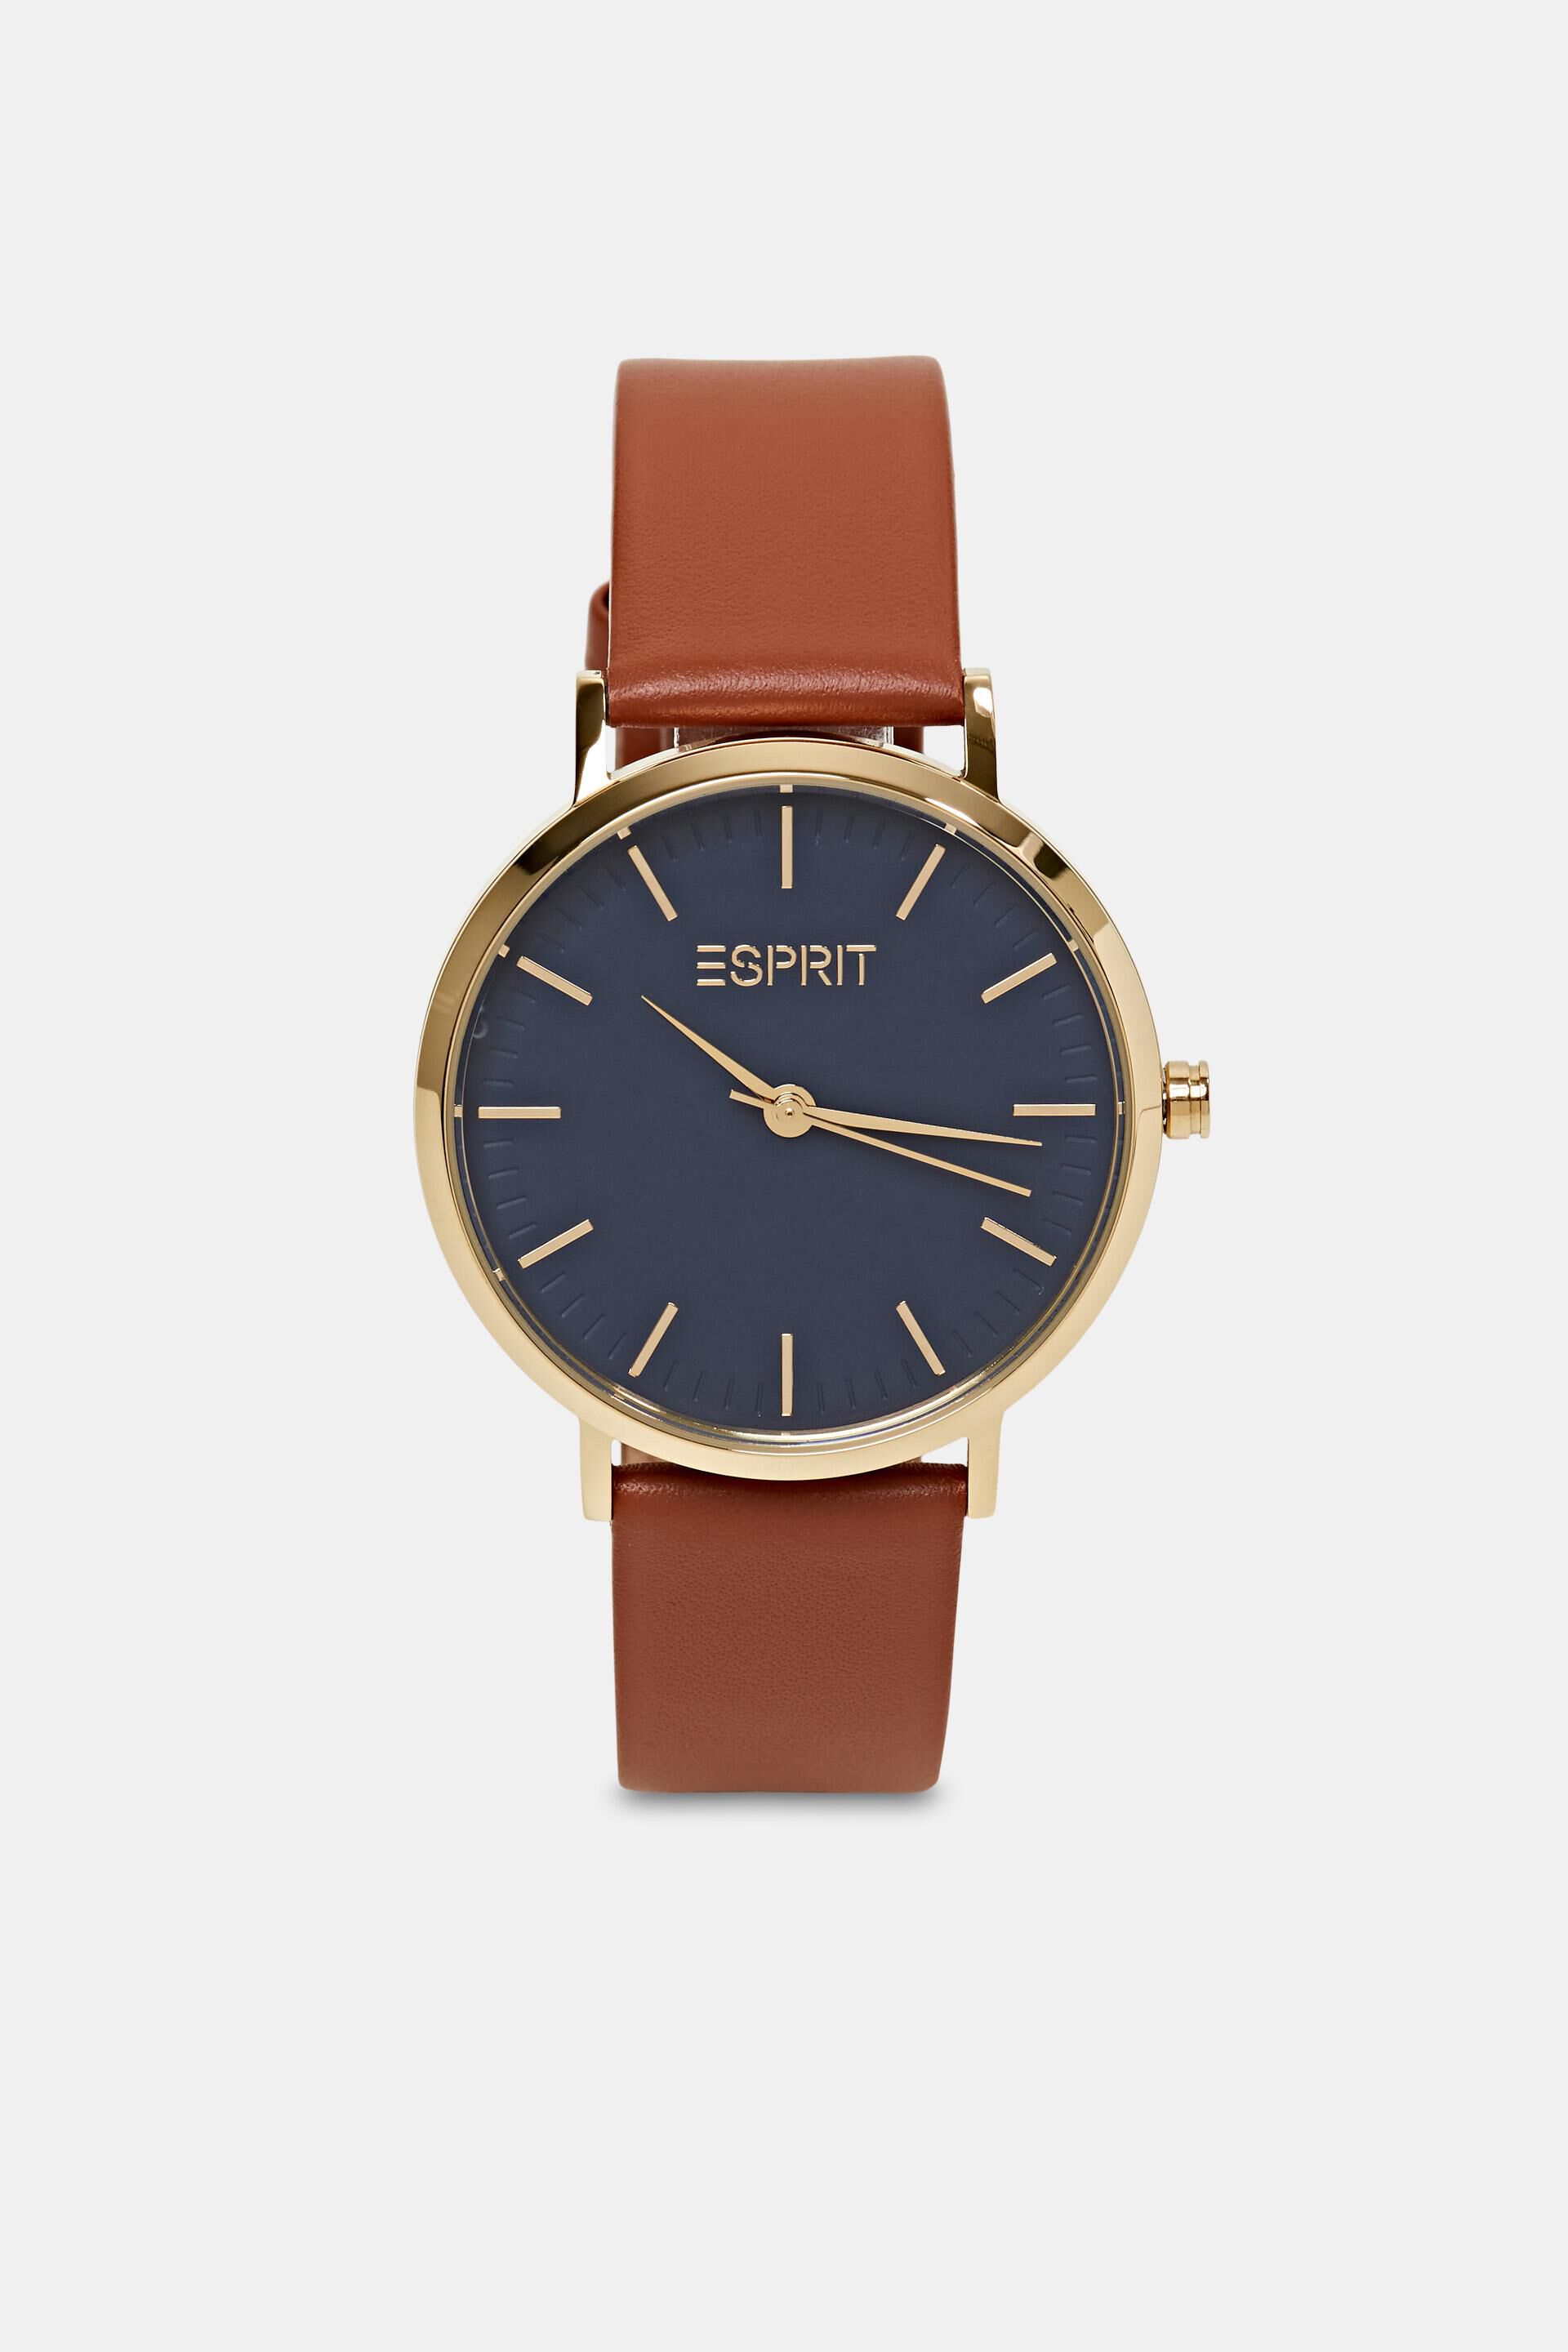 Esprit Mode Gold-Tone Stainless Steel Leather Watch